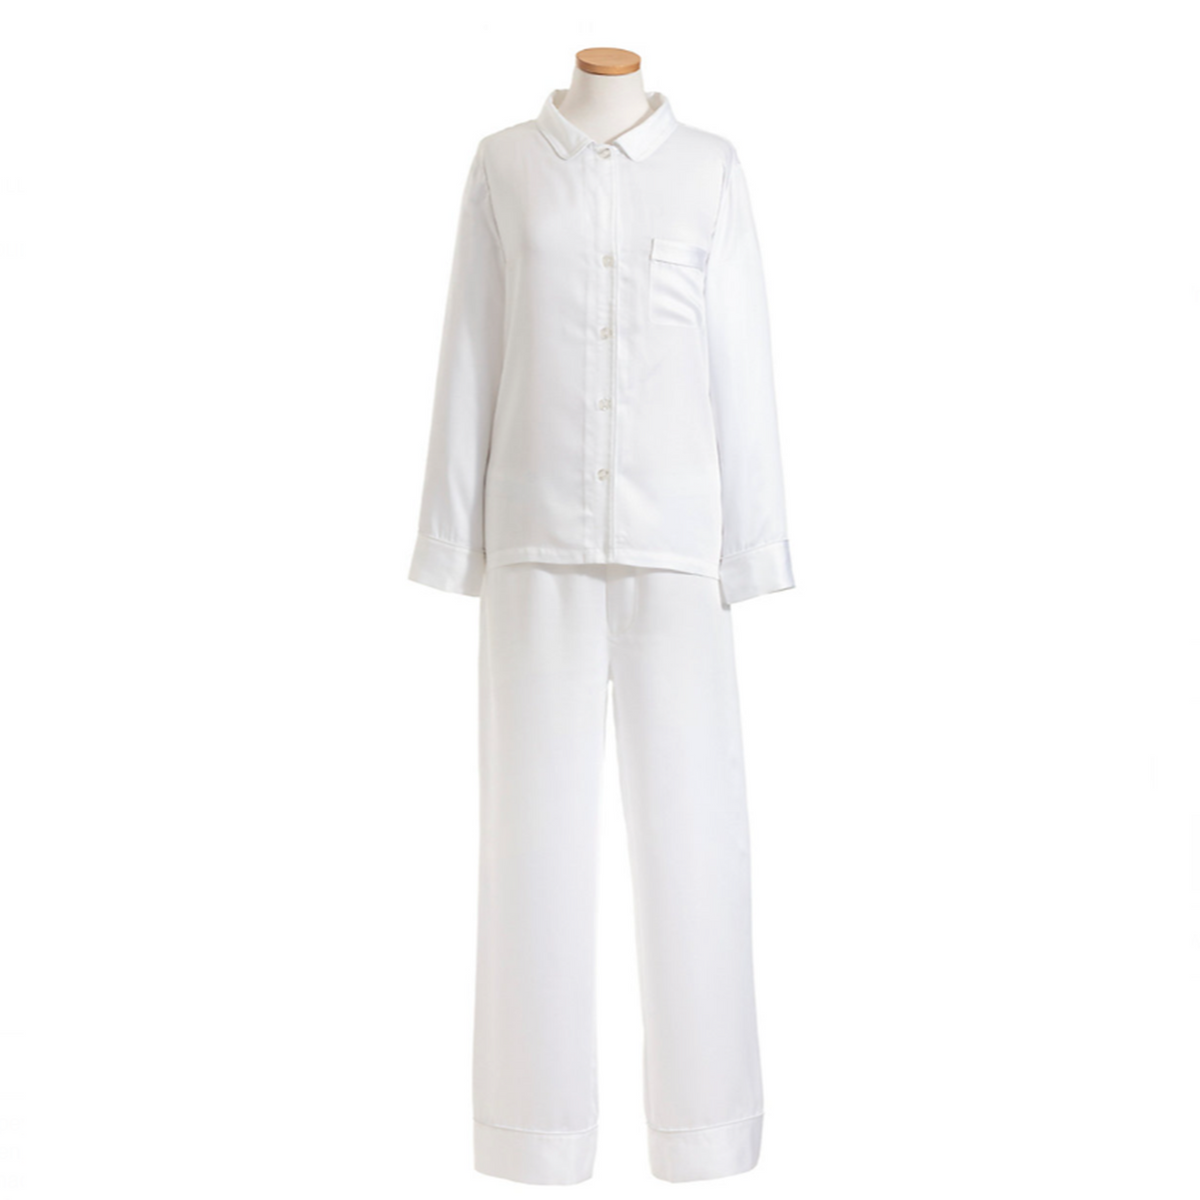 Mannequin wearing a Pine Cone Hill Silken Solid Pajama in White Color